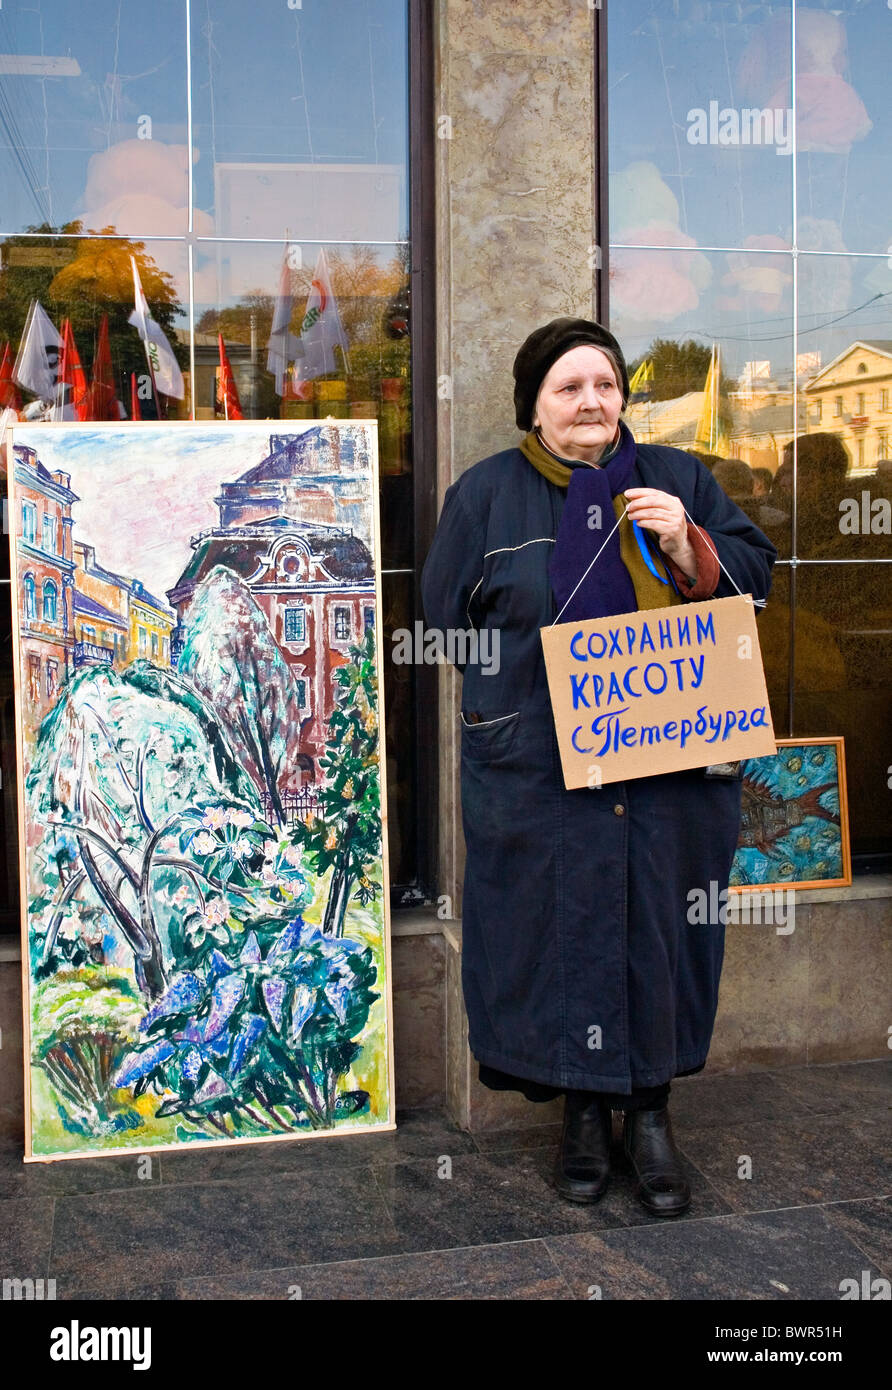 'Let's preserve the beauty of St Petersburg' Old woman with banners and paintings at the 'Save St Petersburg' demonstration Stock Photo